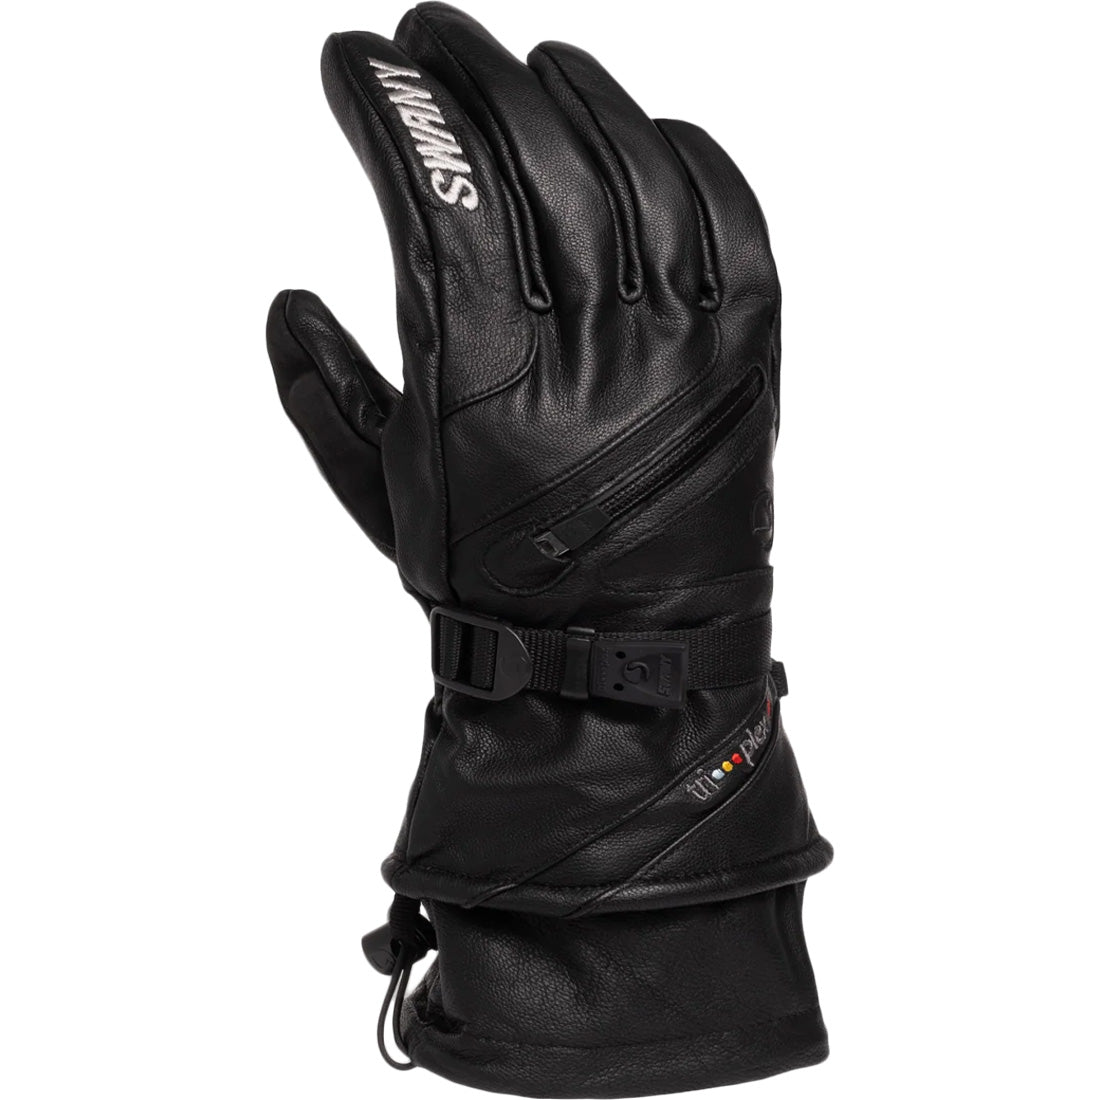 Swany X-Cell Glove 2.1 - Women's